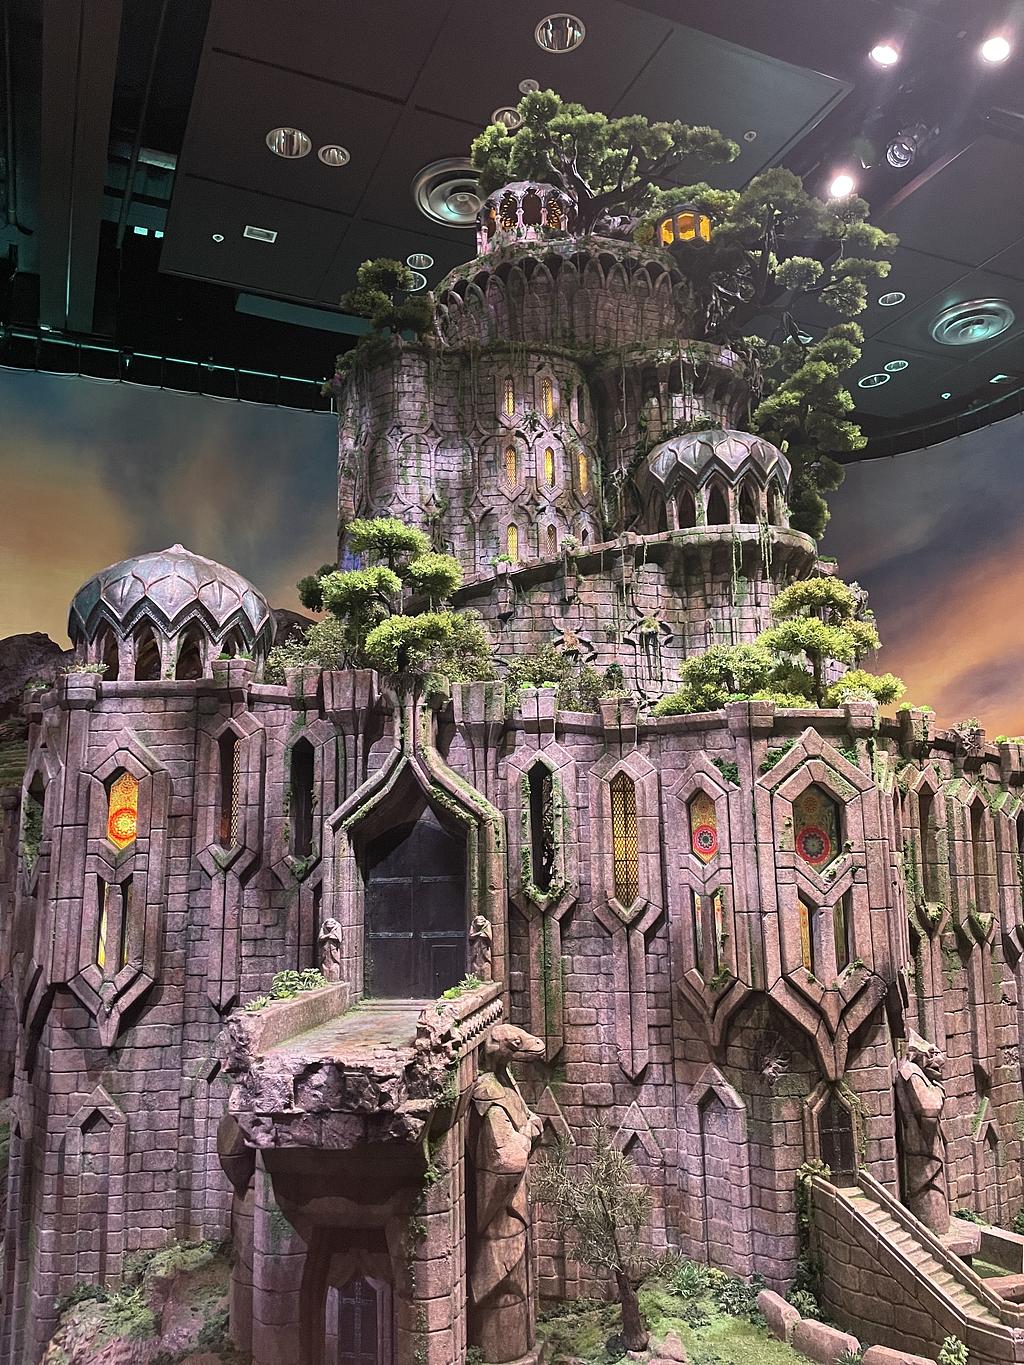 Scale model of a castle